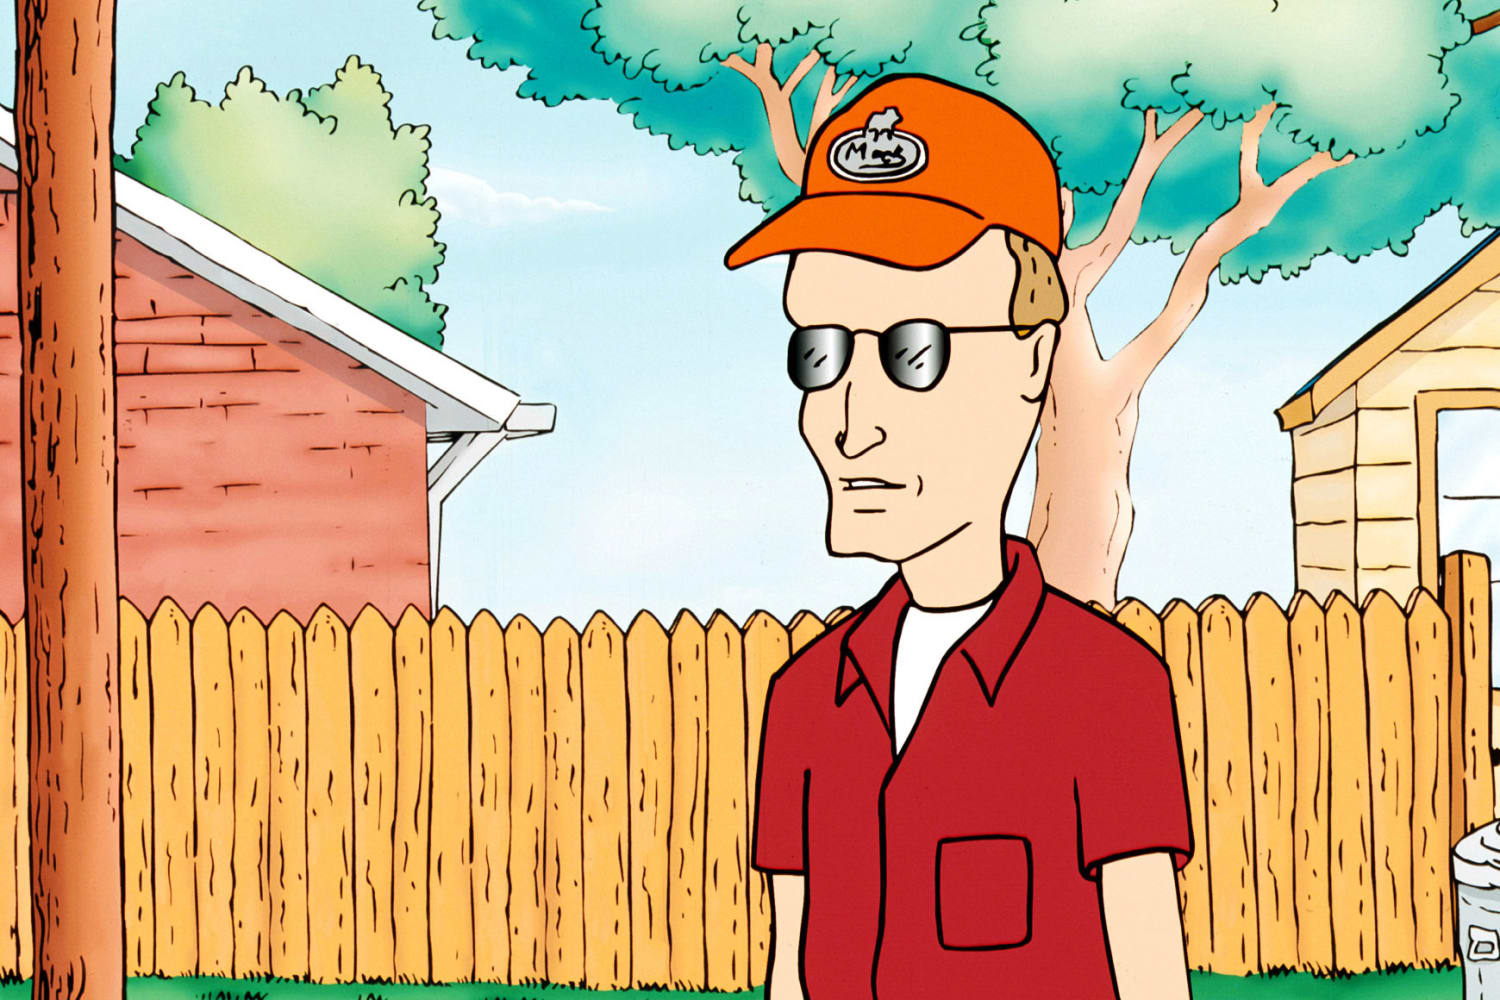 King of the Hill Creator Says Animated Sitcom 'Has a Very Good